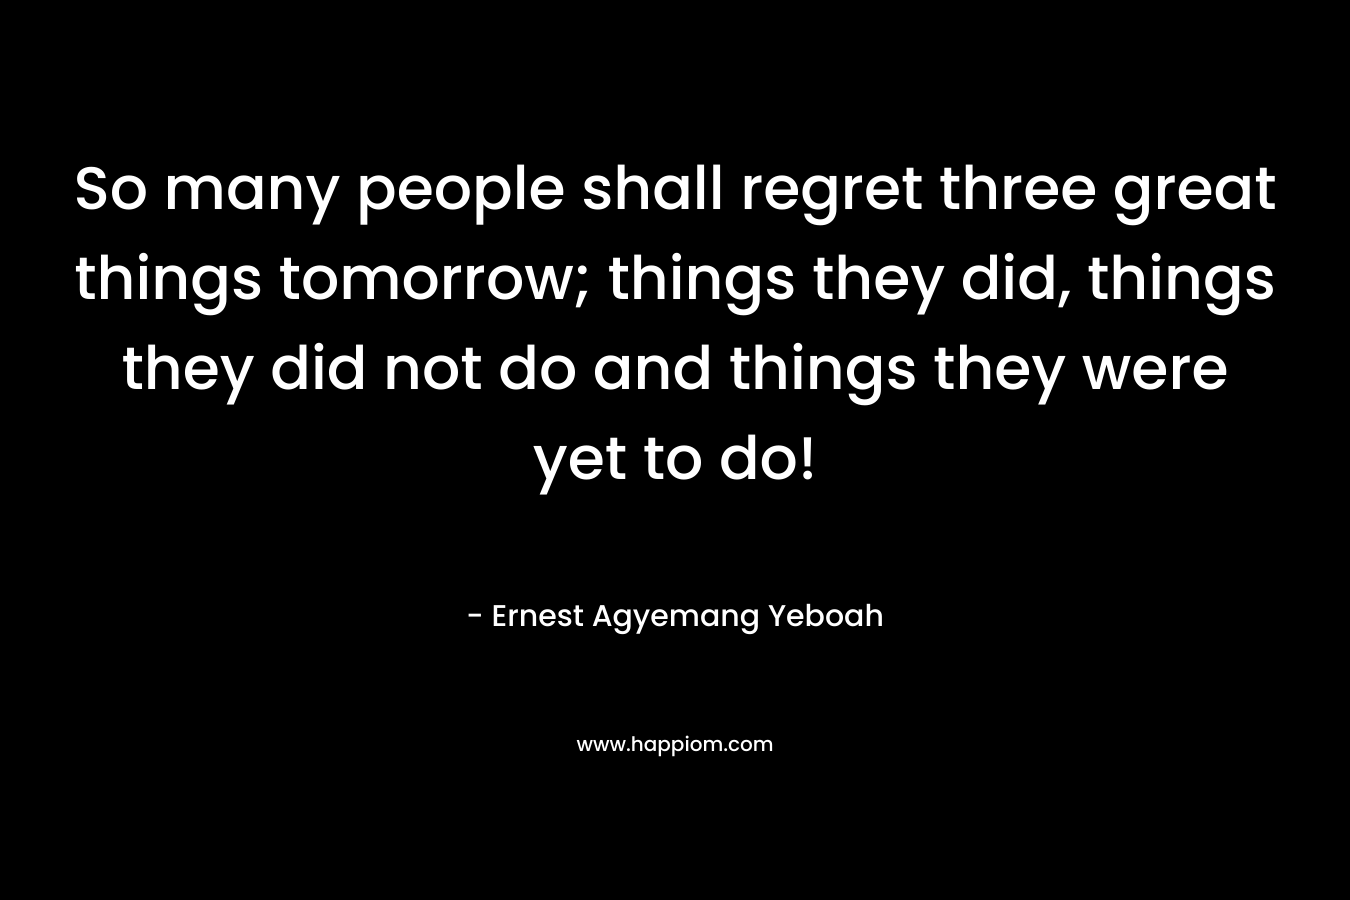 So many people shall regret three great things tomorrow; things they did, things they did not do and things they were yet to do!